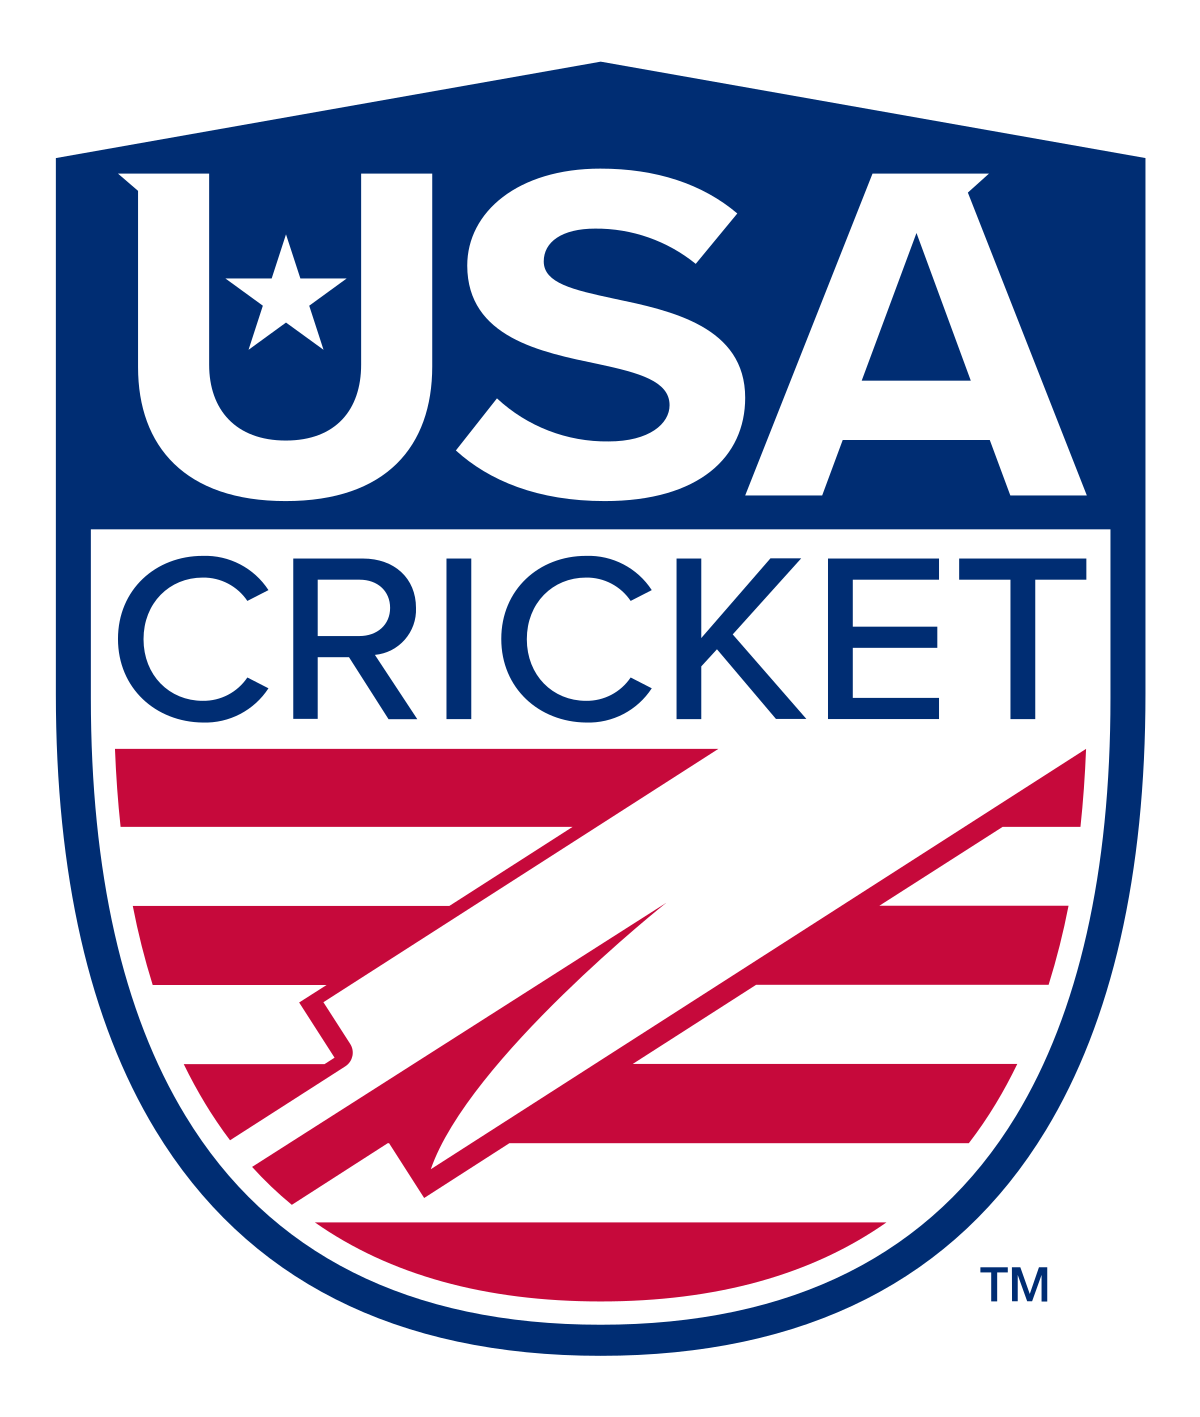 USOPC recognition for USA Cricket likely to boost bid for inclusion at Los Angeles 2028